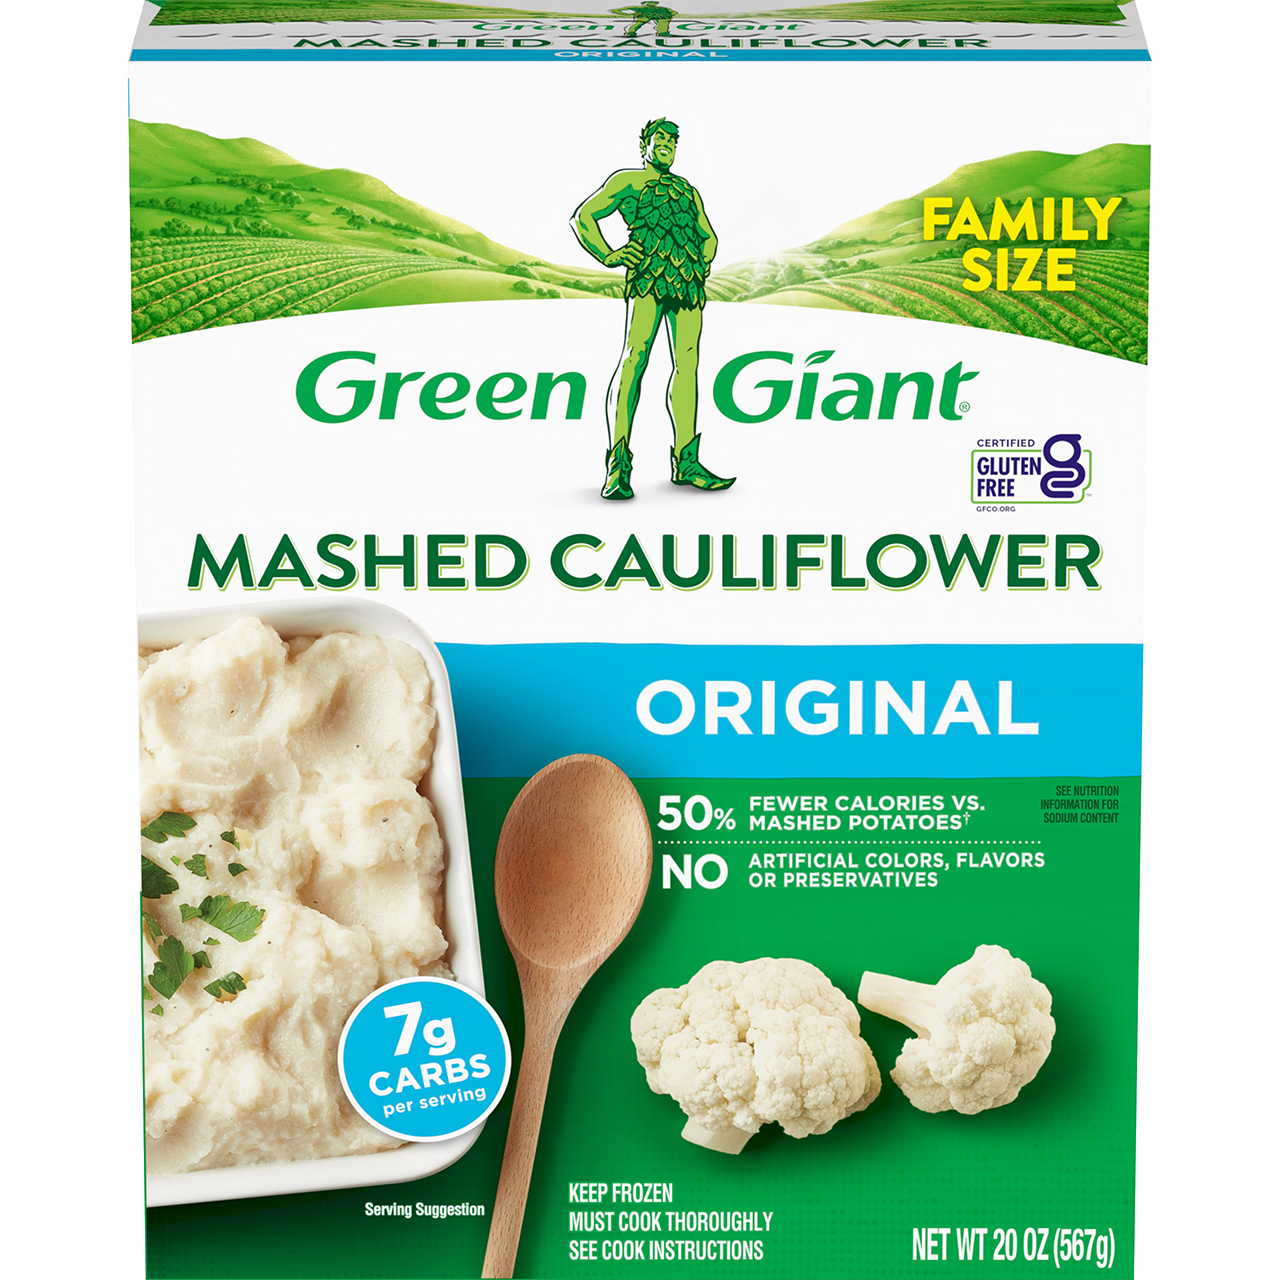 Love at first bite! Green Giant Mashed Cauliflower is the ideal low-calorie, veggie-packed alternative to traditional mashed potatoes.